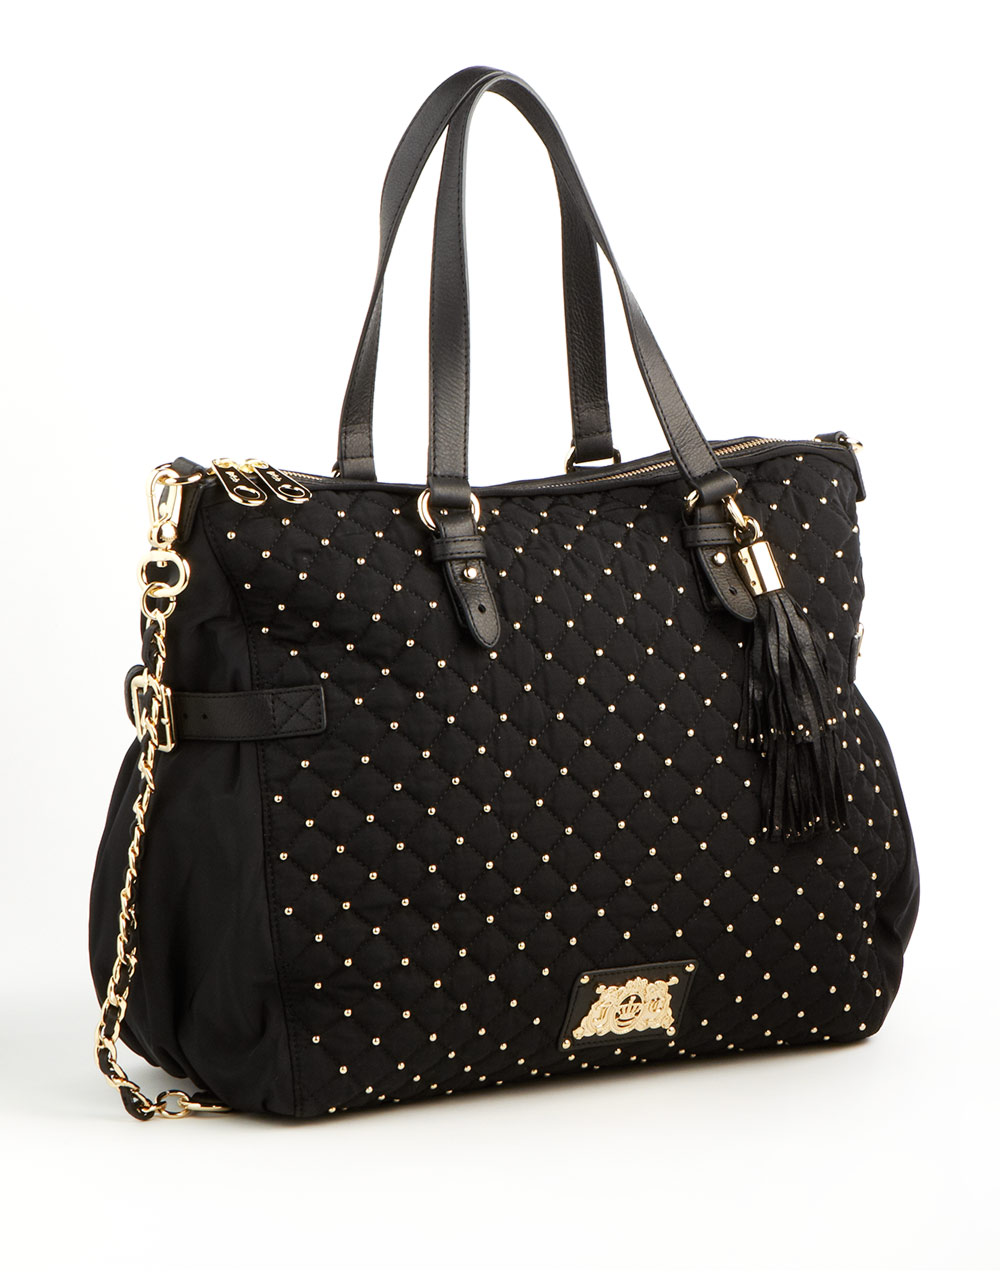 Juicy Couture Studded Quilted Tote Bag in Black | Lyst